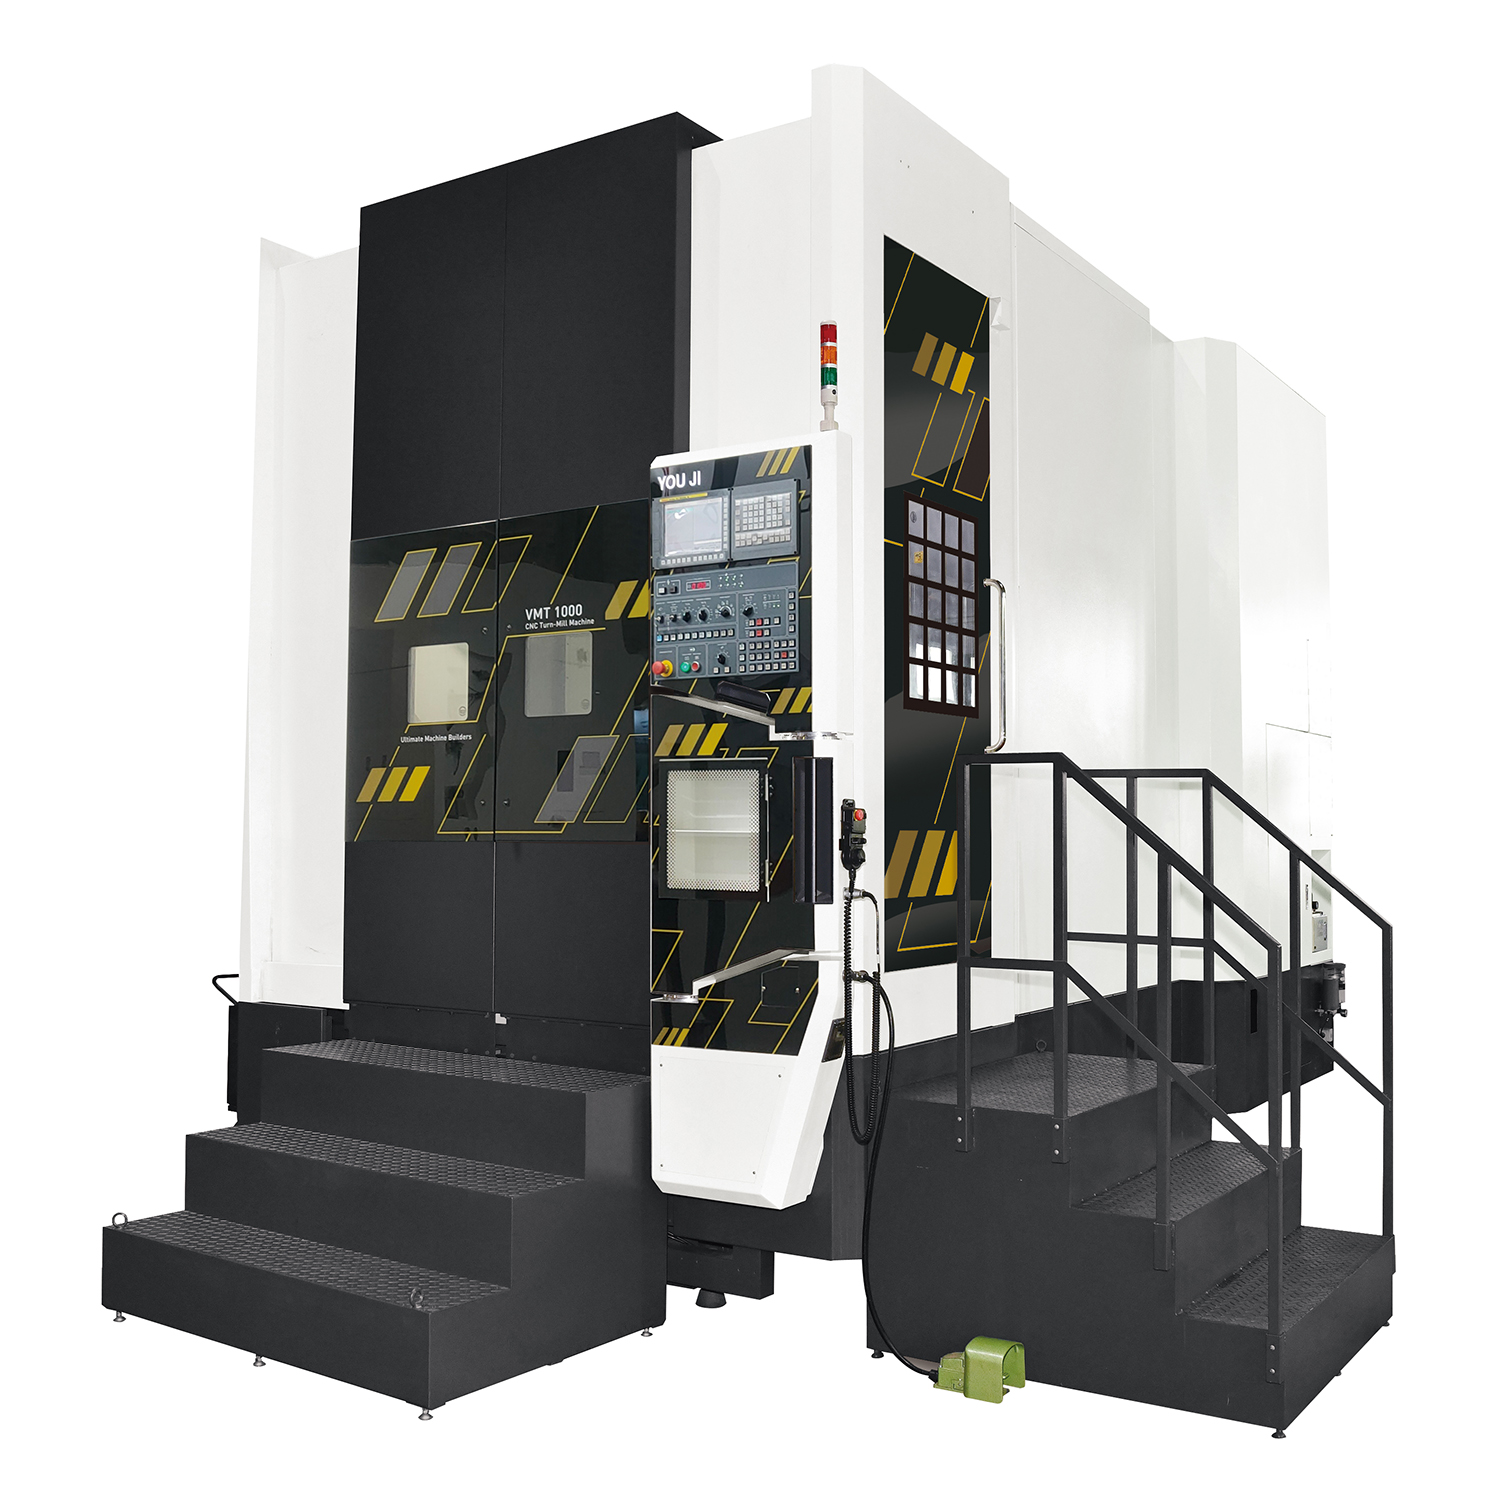  The VMT-1000+Y vertical mill/turn center reduces the number of setups needed to machine medium- and large-size parts.